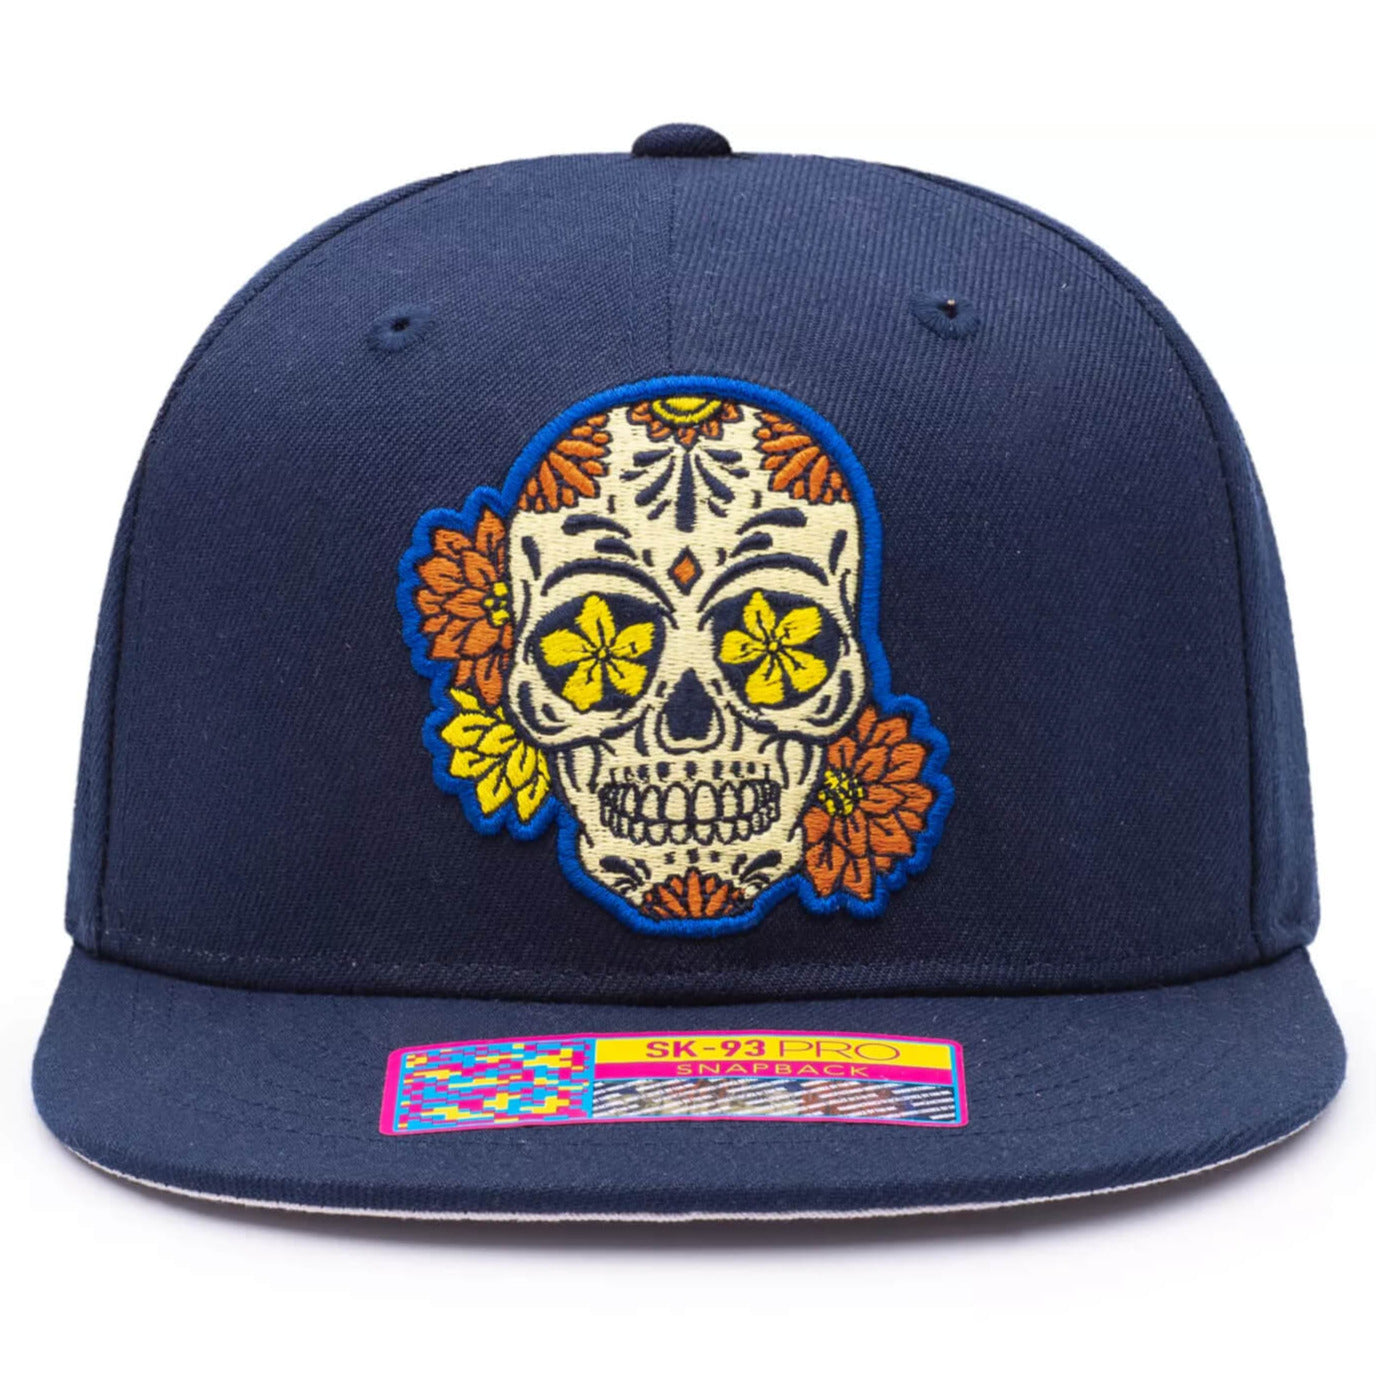 FI Collection Club America Day of the Dead Skull Snapback Hat -Navy-Yellow (Front)